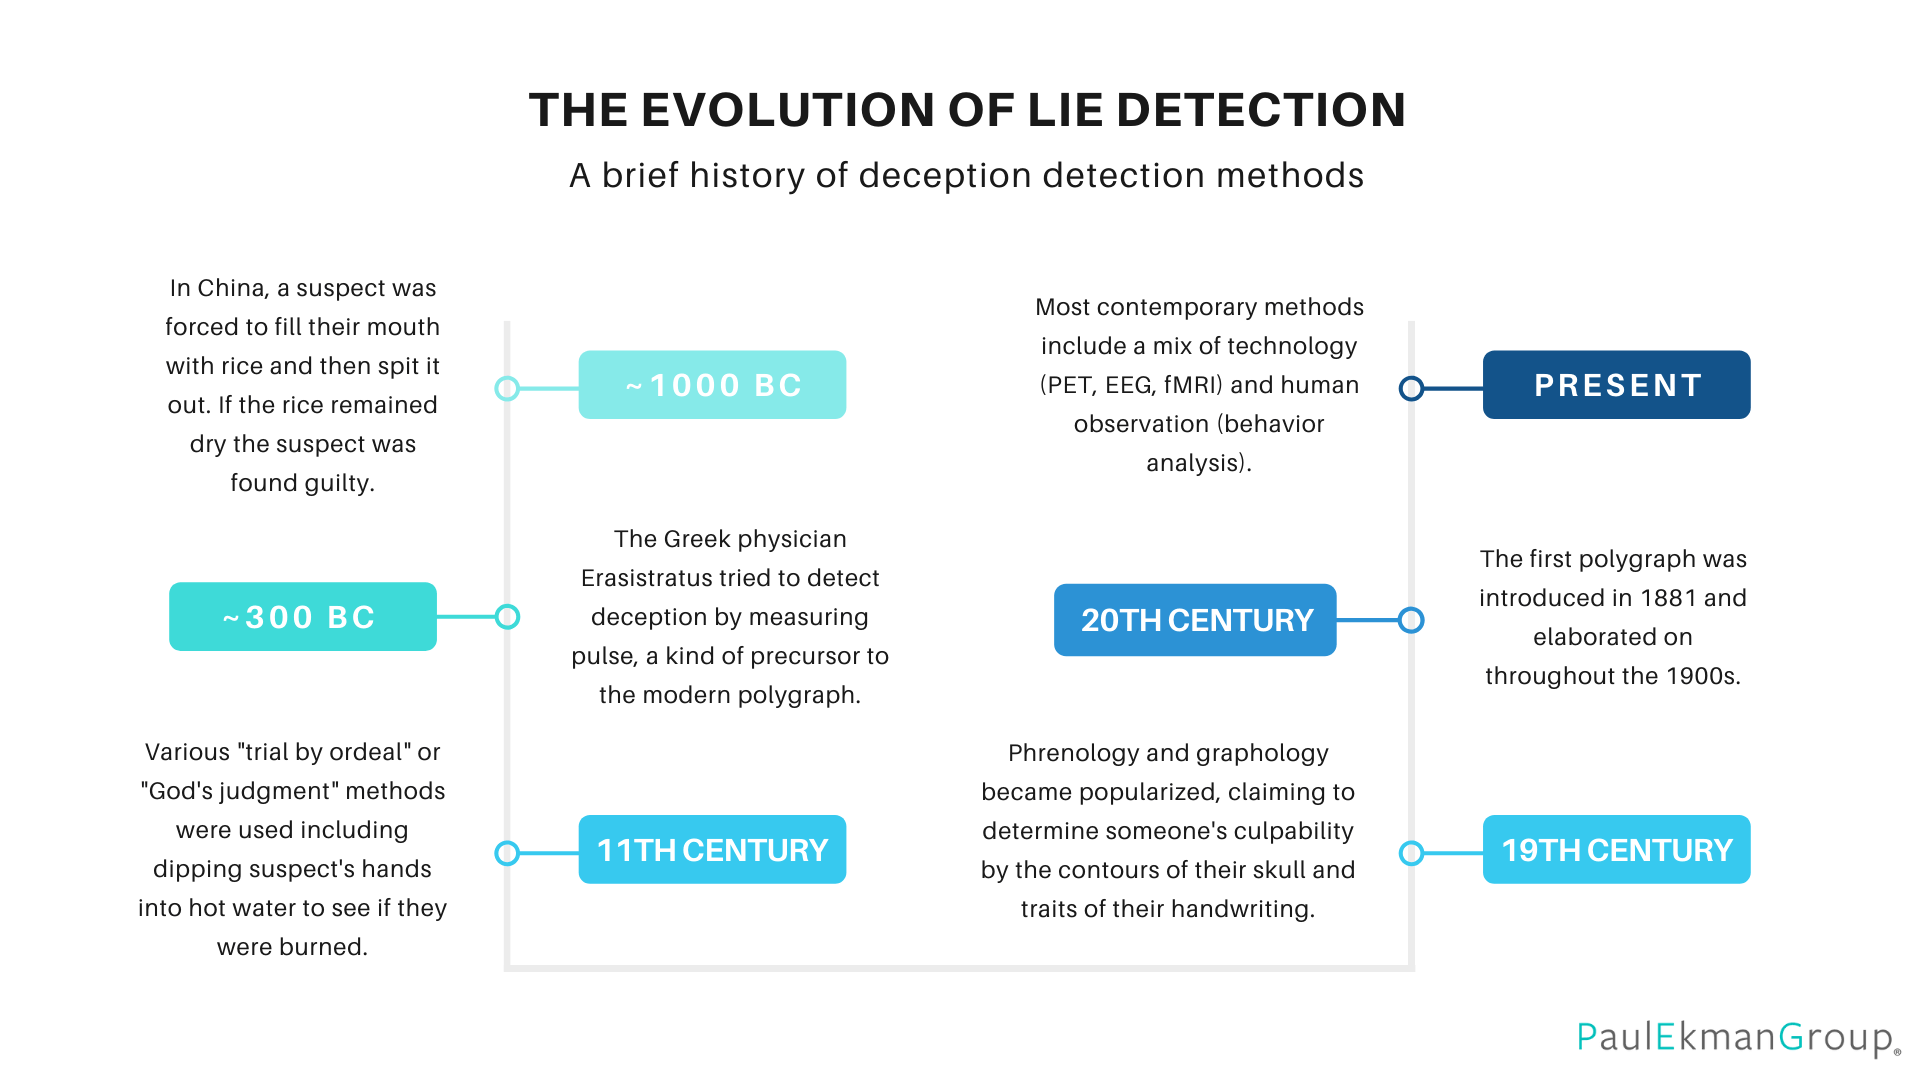 Timeline Showing History of Deception Detection